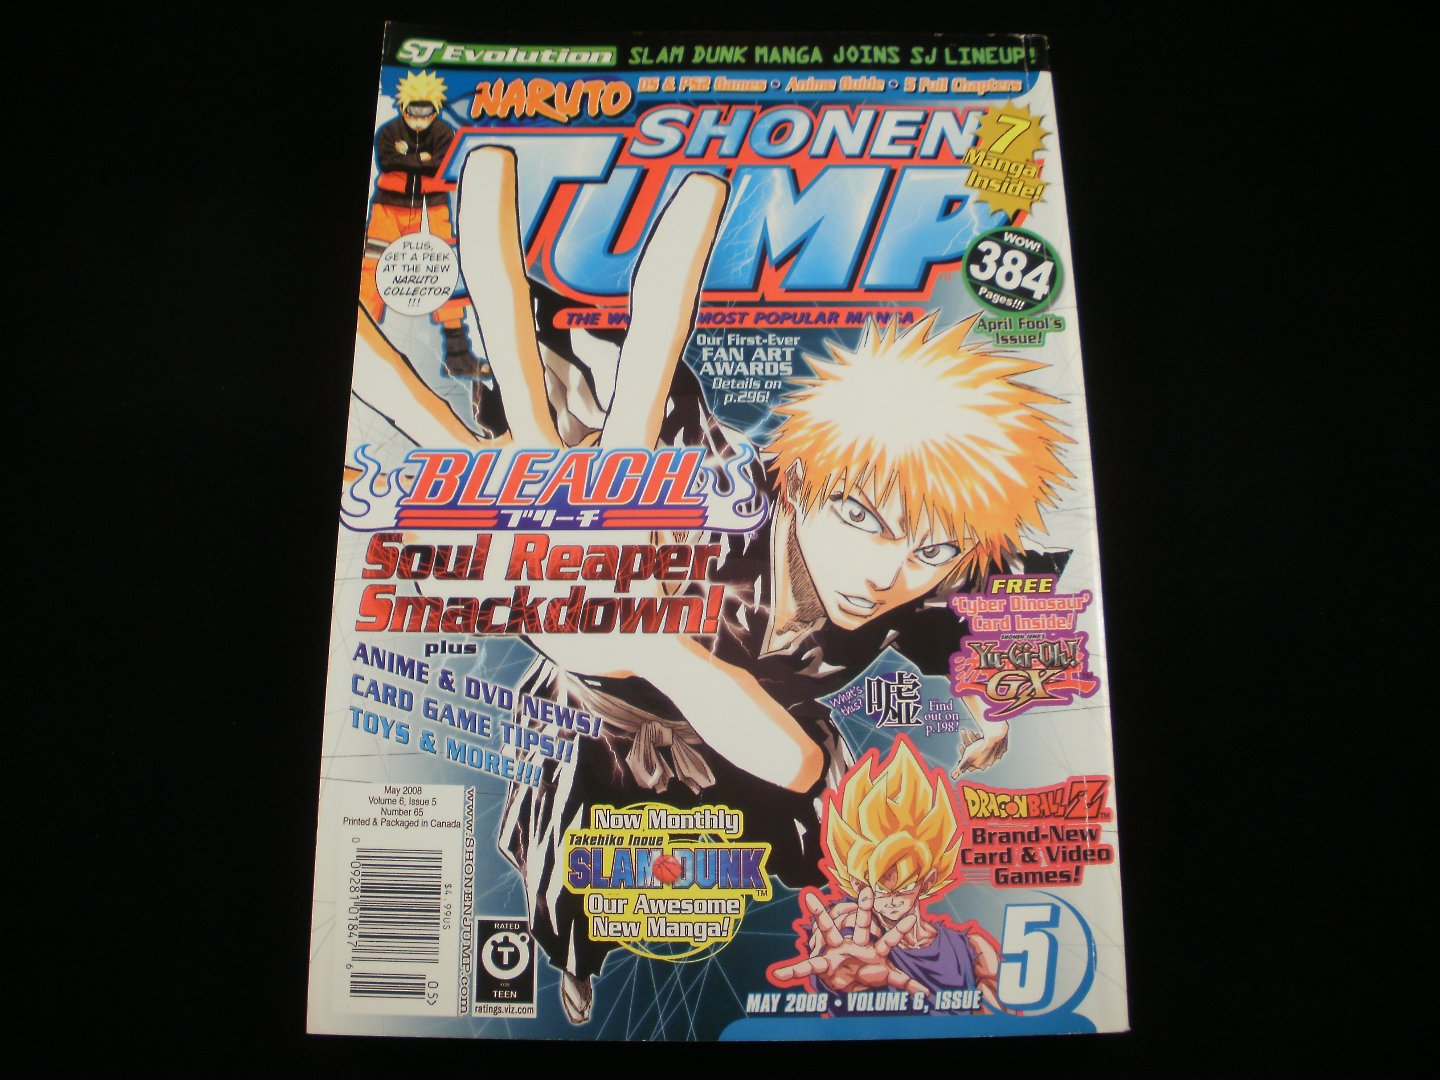 Shonen Jump - May 2008 - Volume 6, Issue 5, Number 65